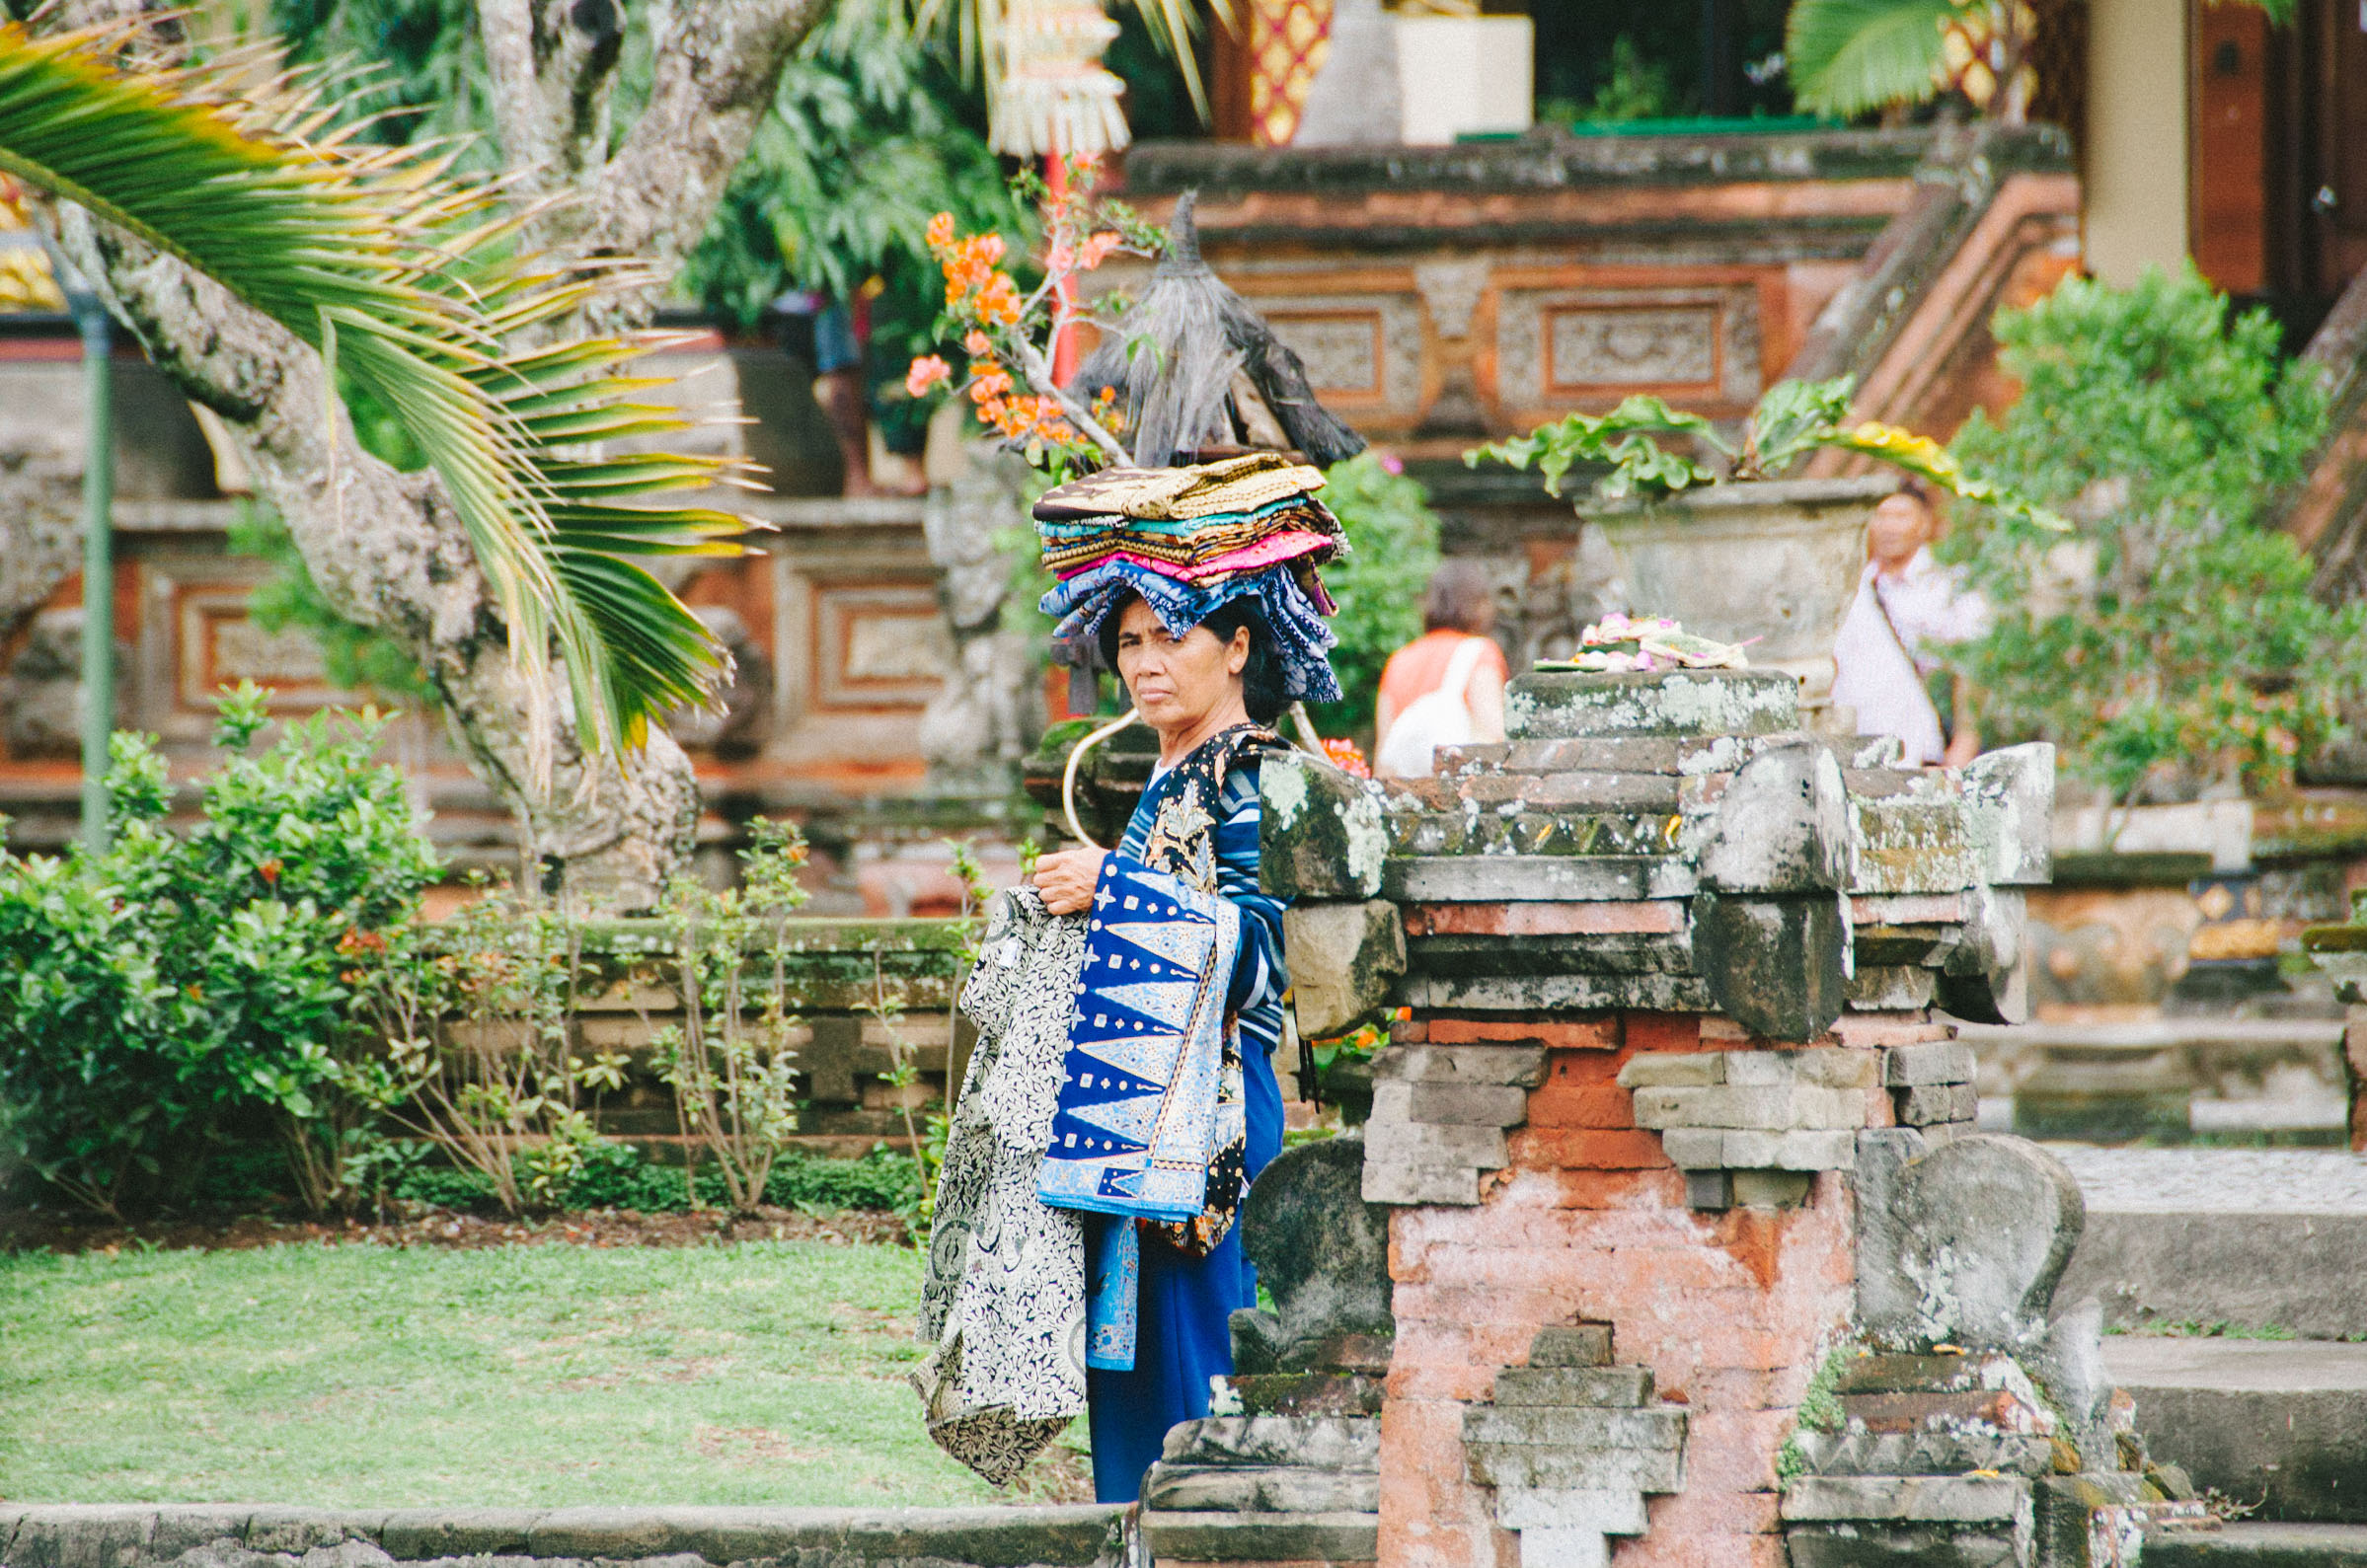 On New Moon day, visitors are only allowed in certain parts of some temples and only while wearing traditional clothing. Local women head out to the temples to sell their often beautifully handmade sarongs and scarfs.